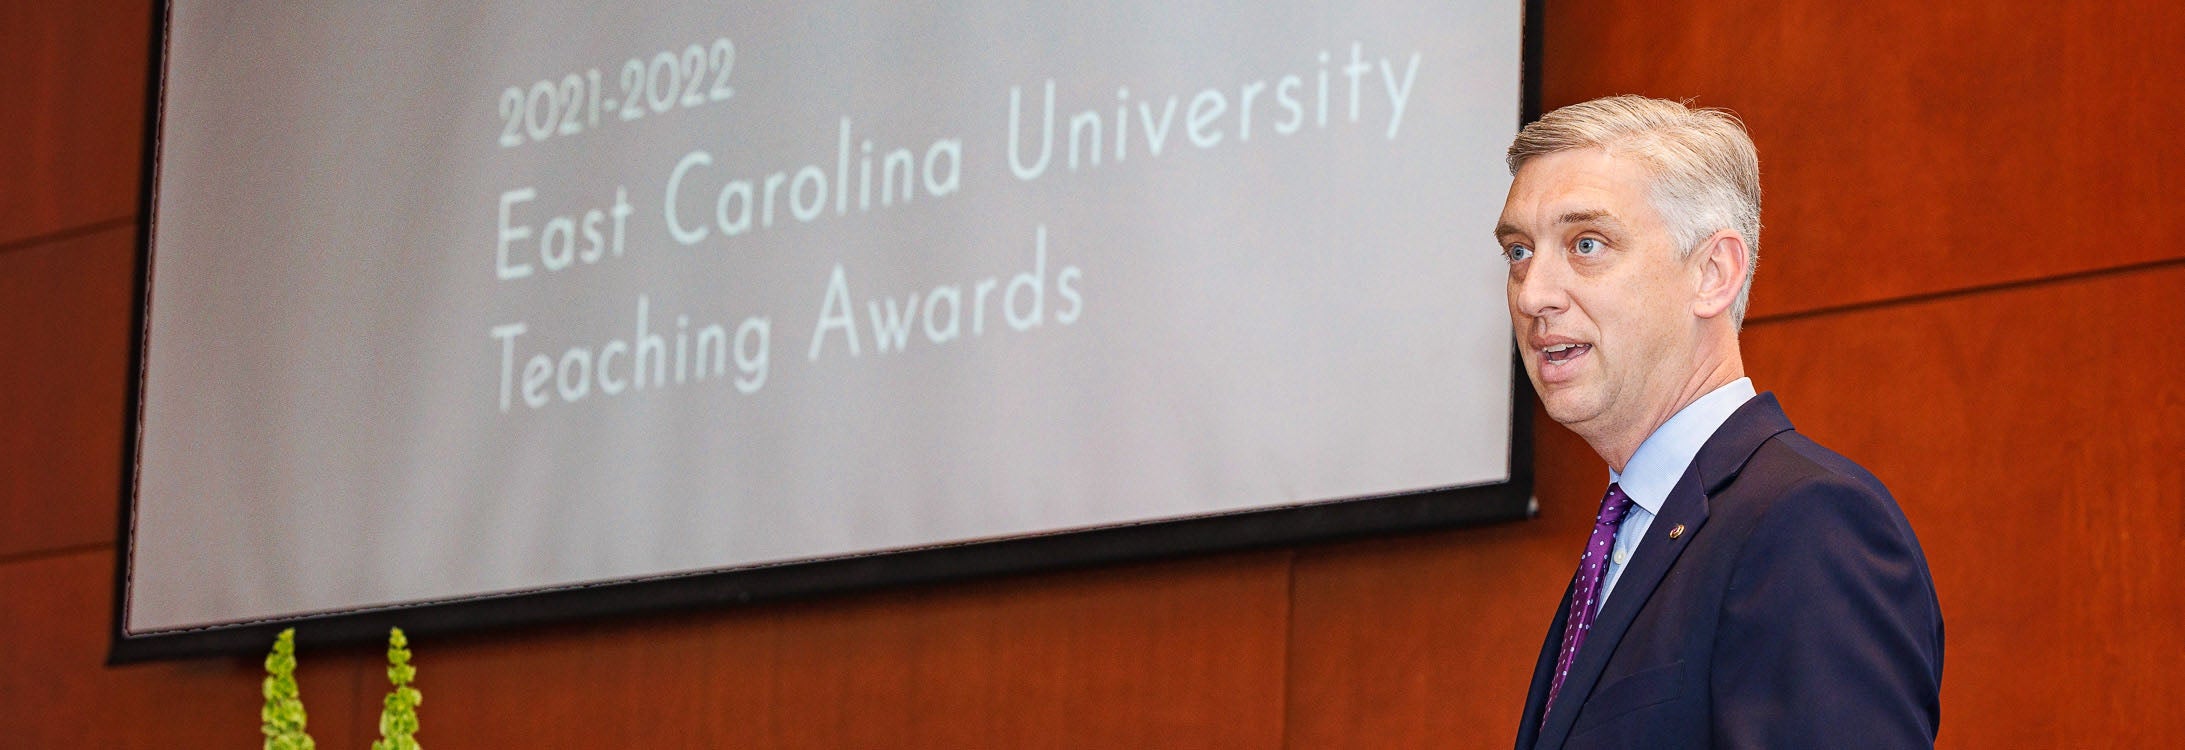 ECU Chancellor Philip Rogers speaks during the University Teaching Awards ceremony in Harvey Hall.